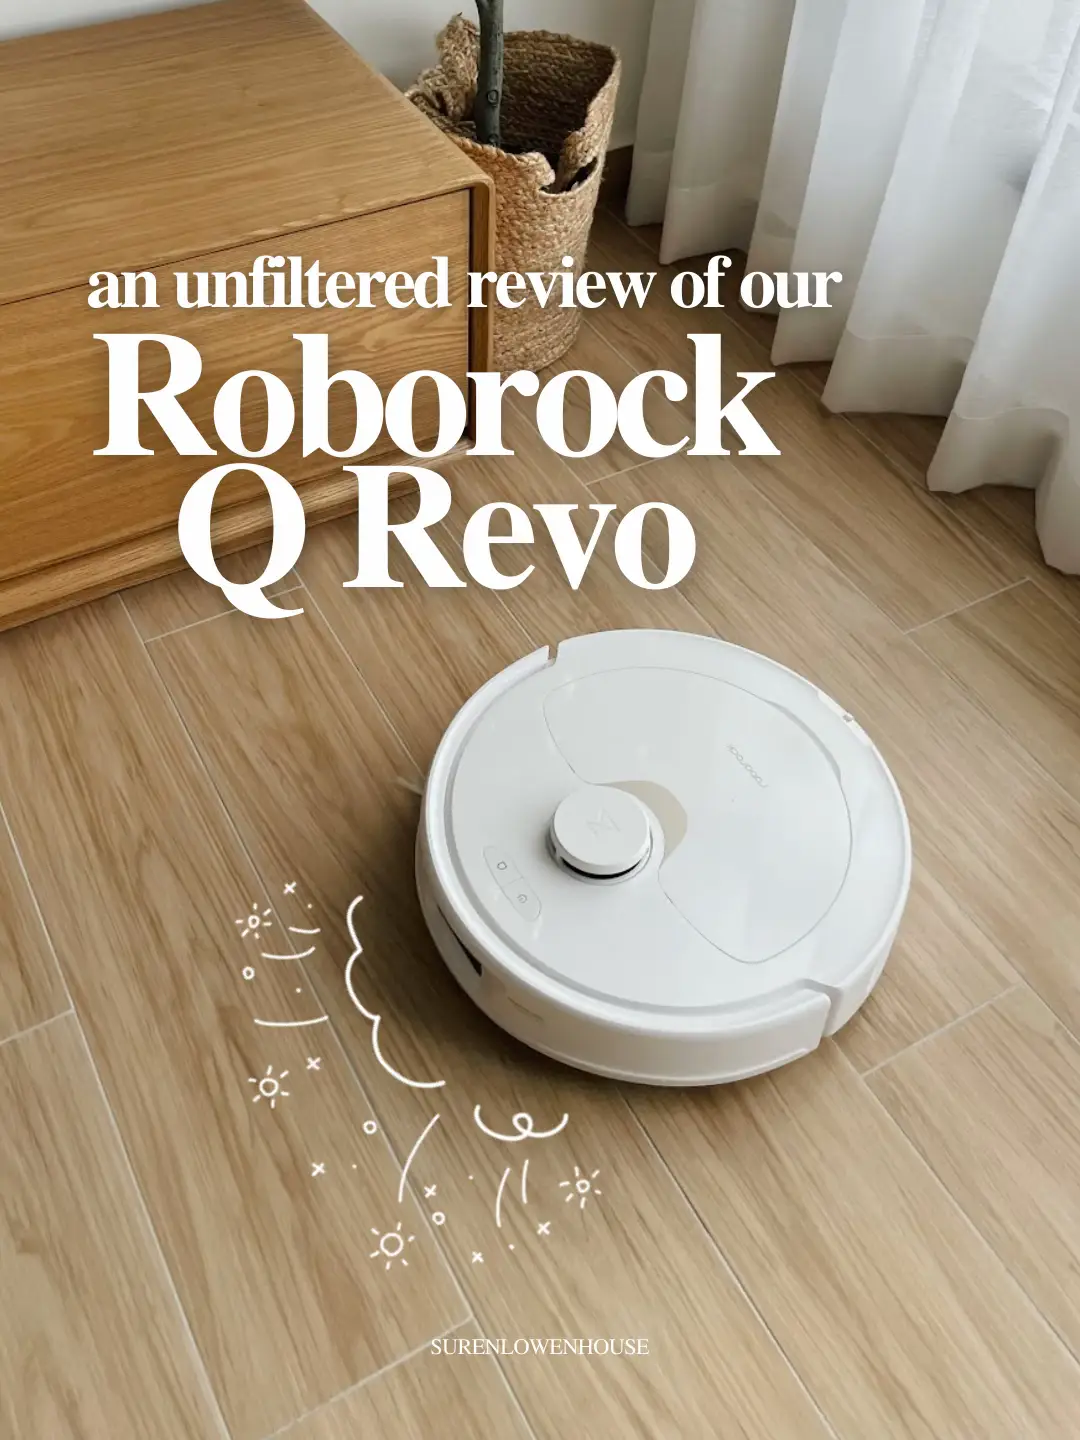 Why we chose the Roborock Q Revo 🧹🤩, Gallery posted by Suren & Lowen